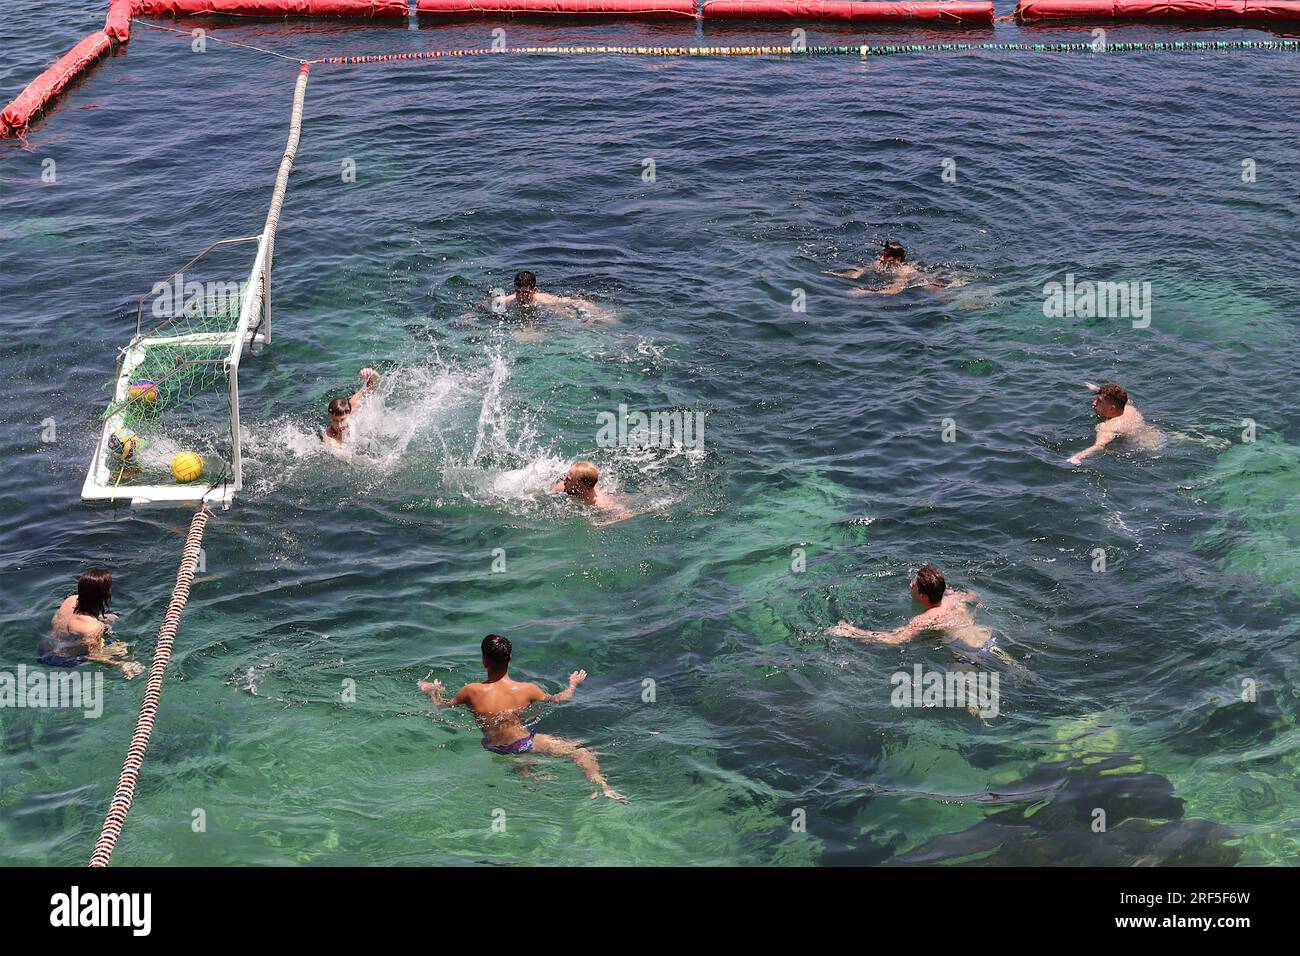 GOAL!! Water polo players during a training session in a sectioned off part of the Mediterranean bay at Marsalforn, Gozo, Malta, June 2022. Stock Photo